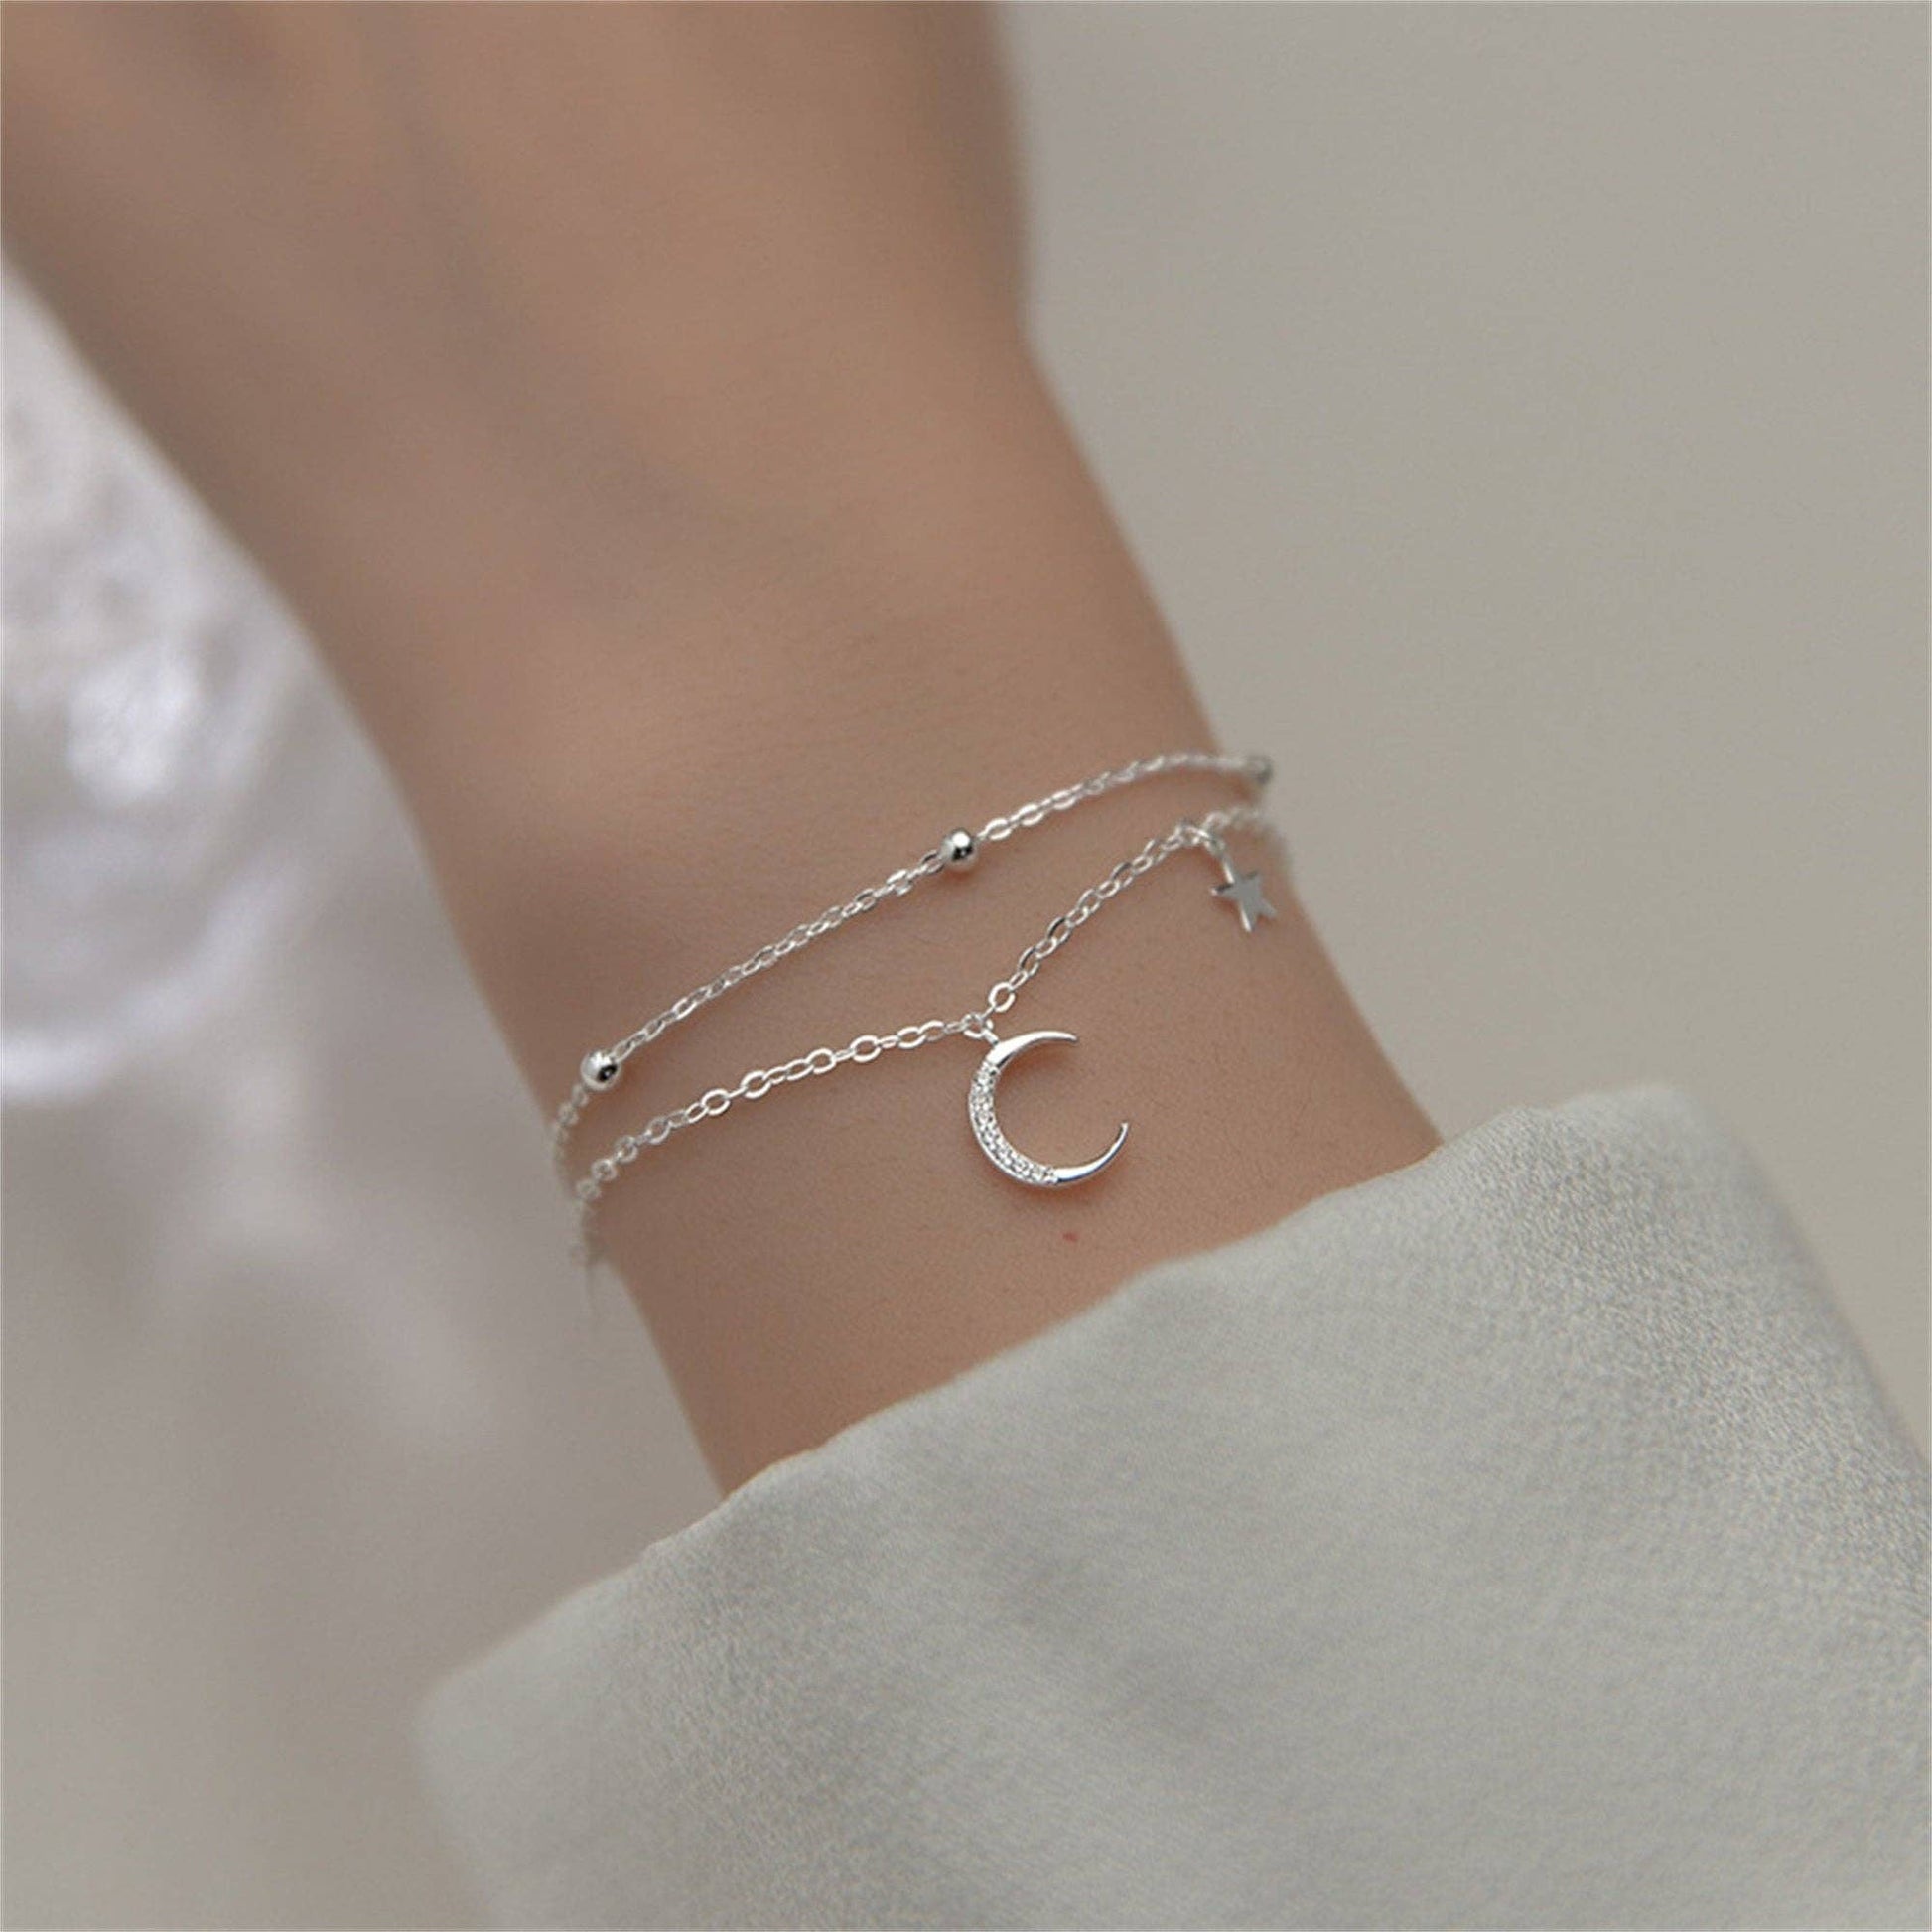 Boho Moon Star Charm Layered Bracelet in 925 Sterling Silver Core Perimade & Co. LLC